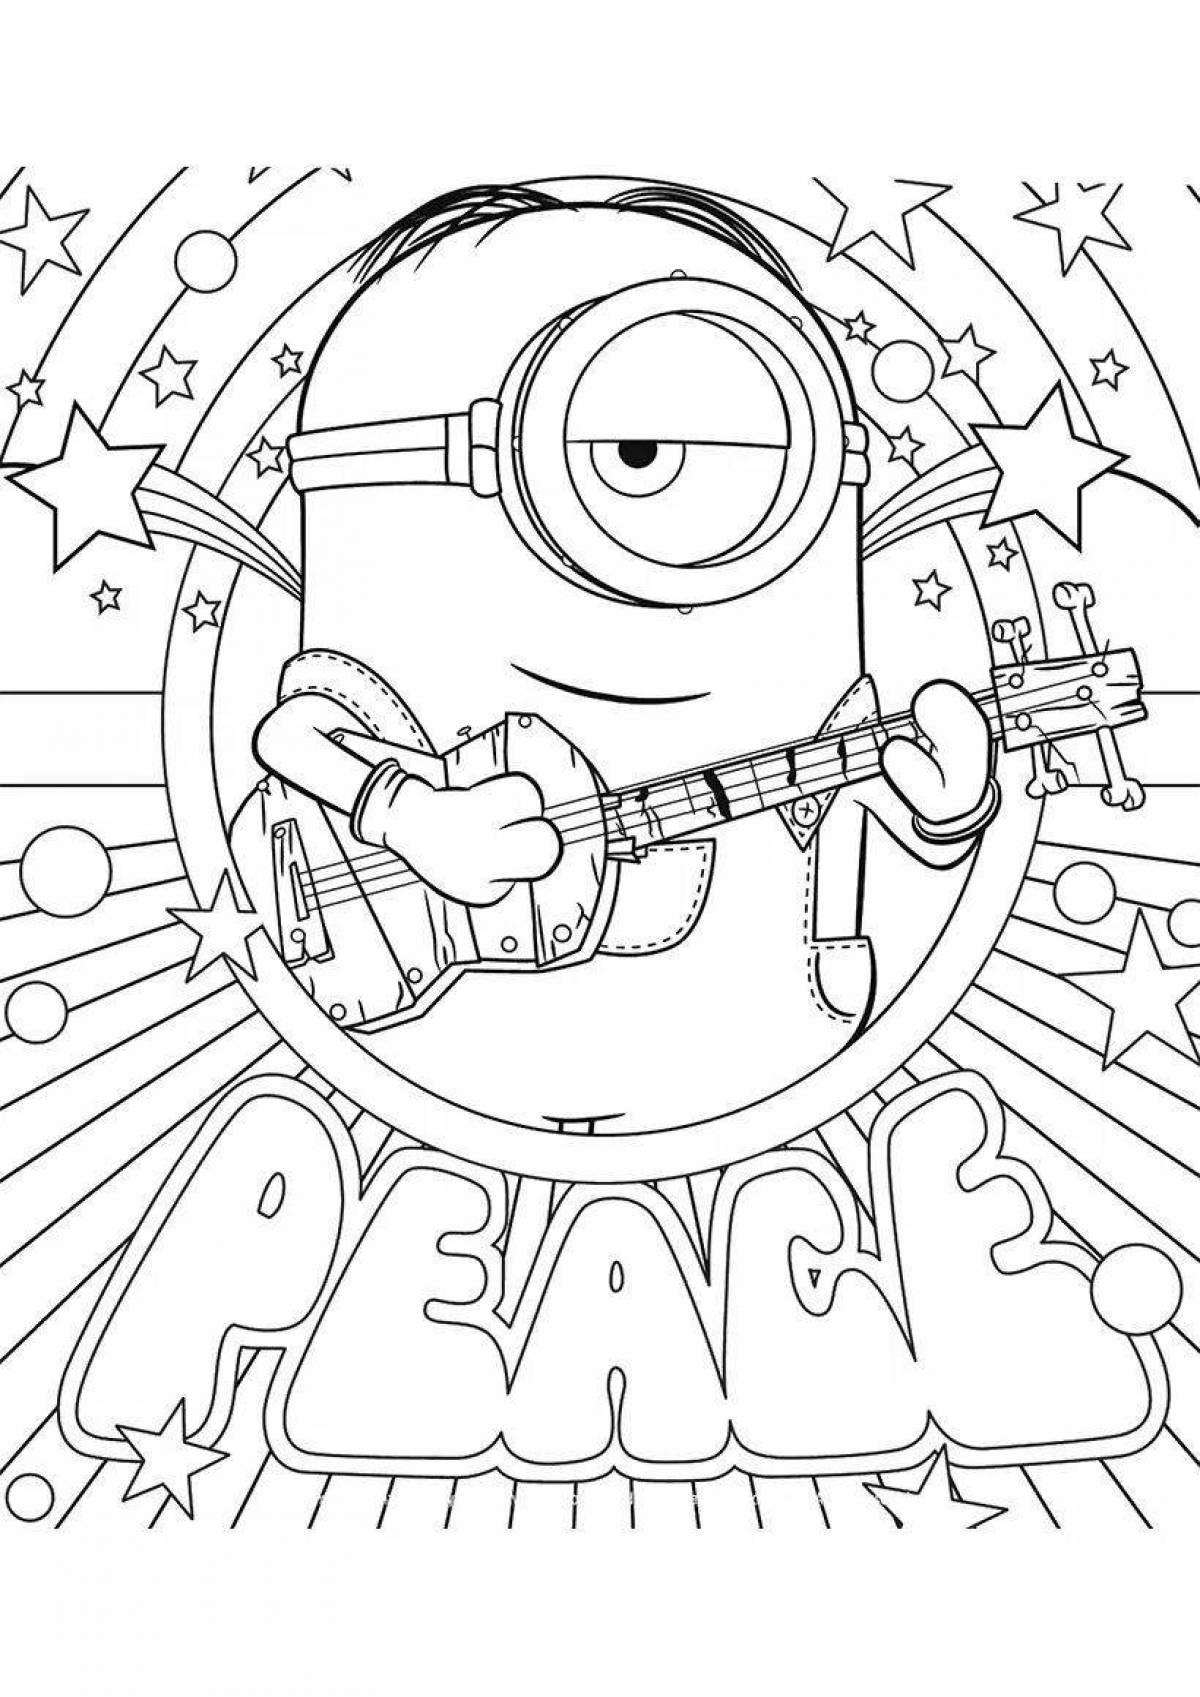 Minions gravity coloring page